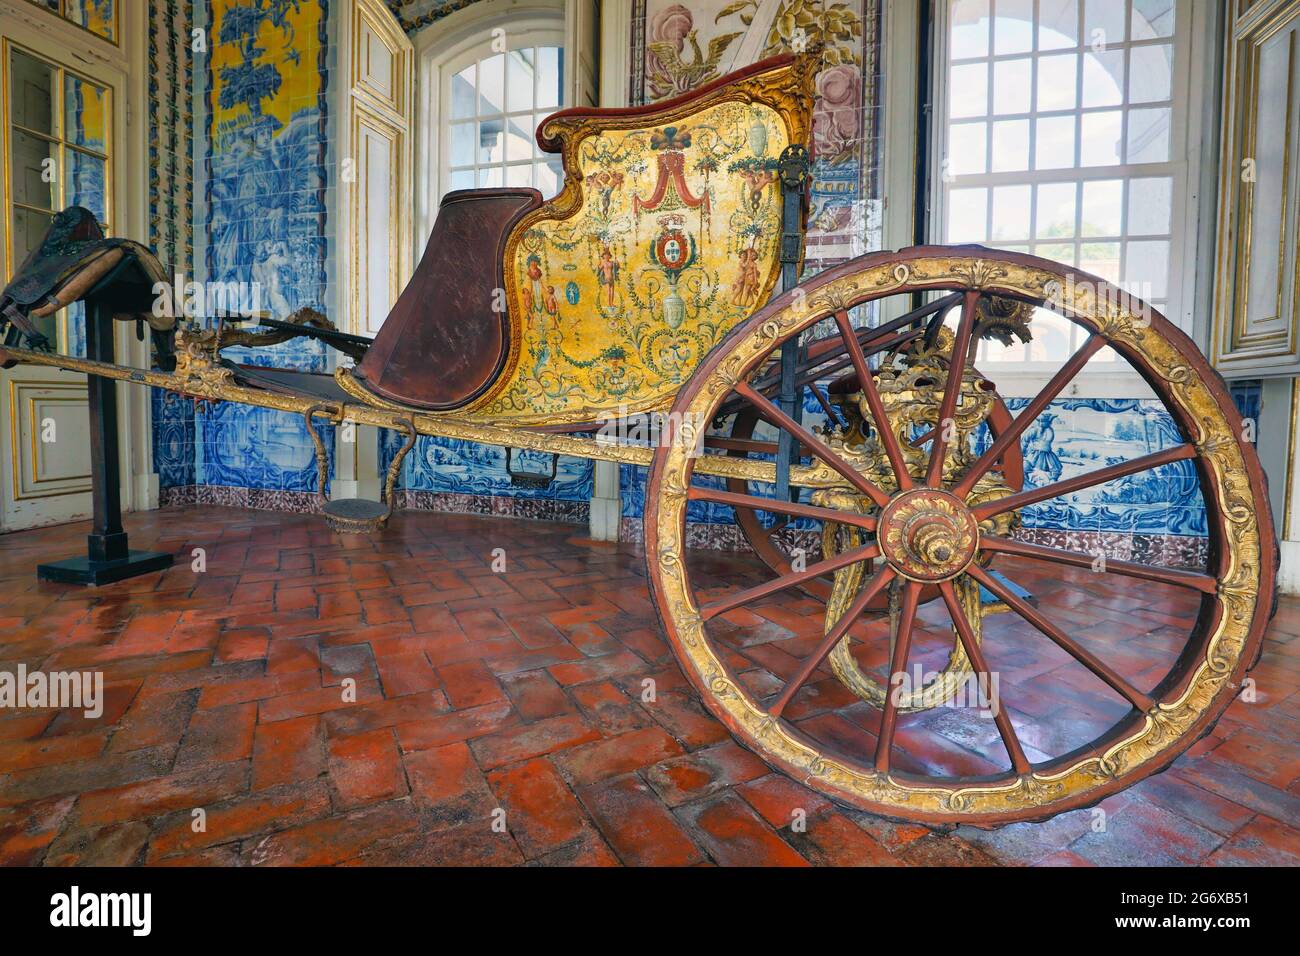 Queluz Palace, Sintra Municipality, Portugal.    Richly decorated horse-drawn carriage in the Corredor dos Azulejos, or Tiled Hallway, also known as t Stock Photo